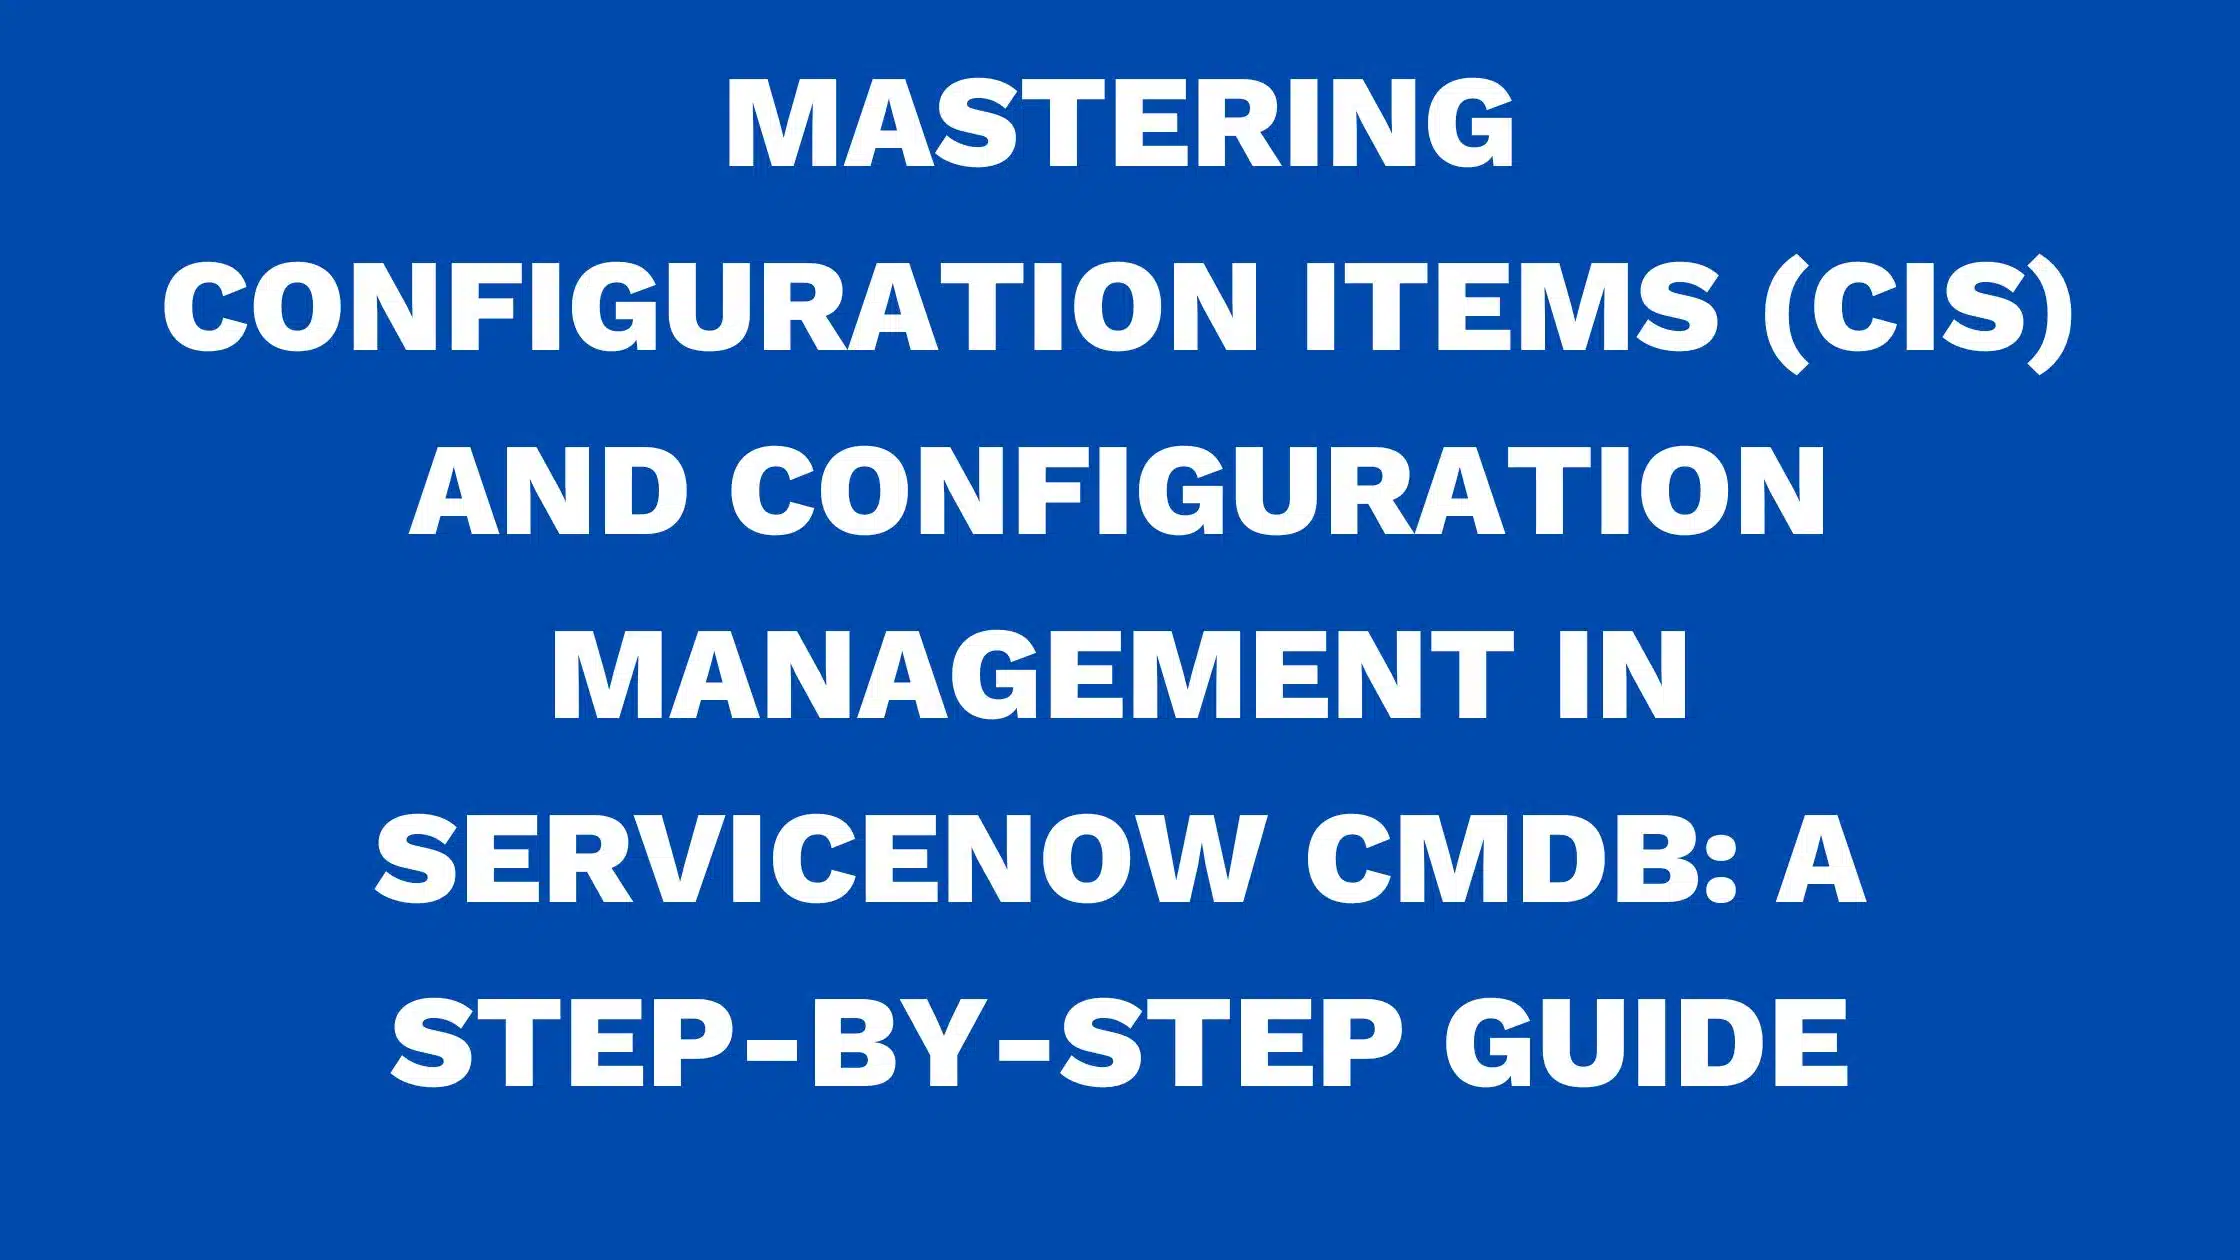 Mastering configuration items (CIs) and configuration management in ServiceNow CMDB: A step-by-step guide